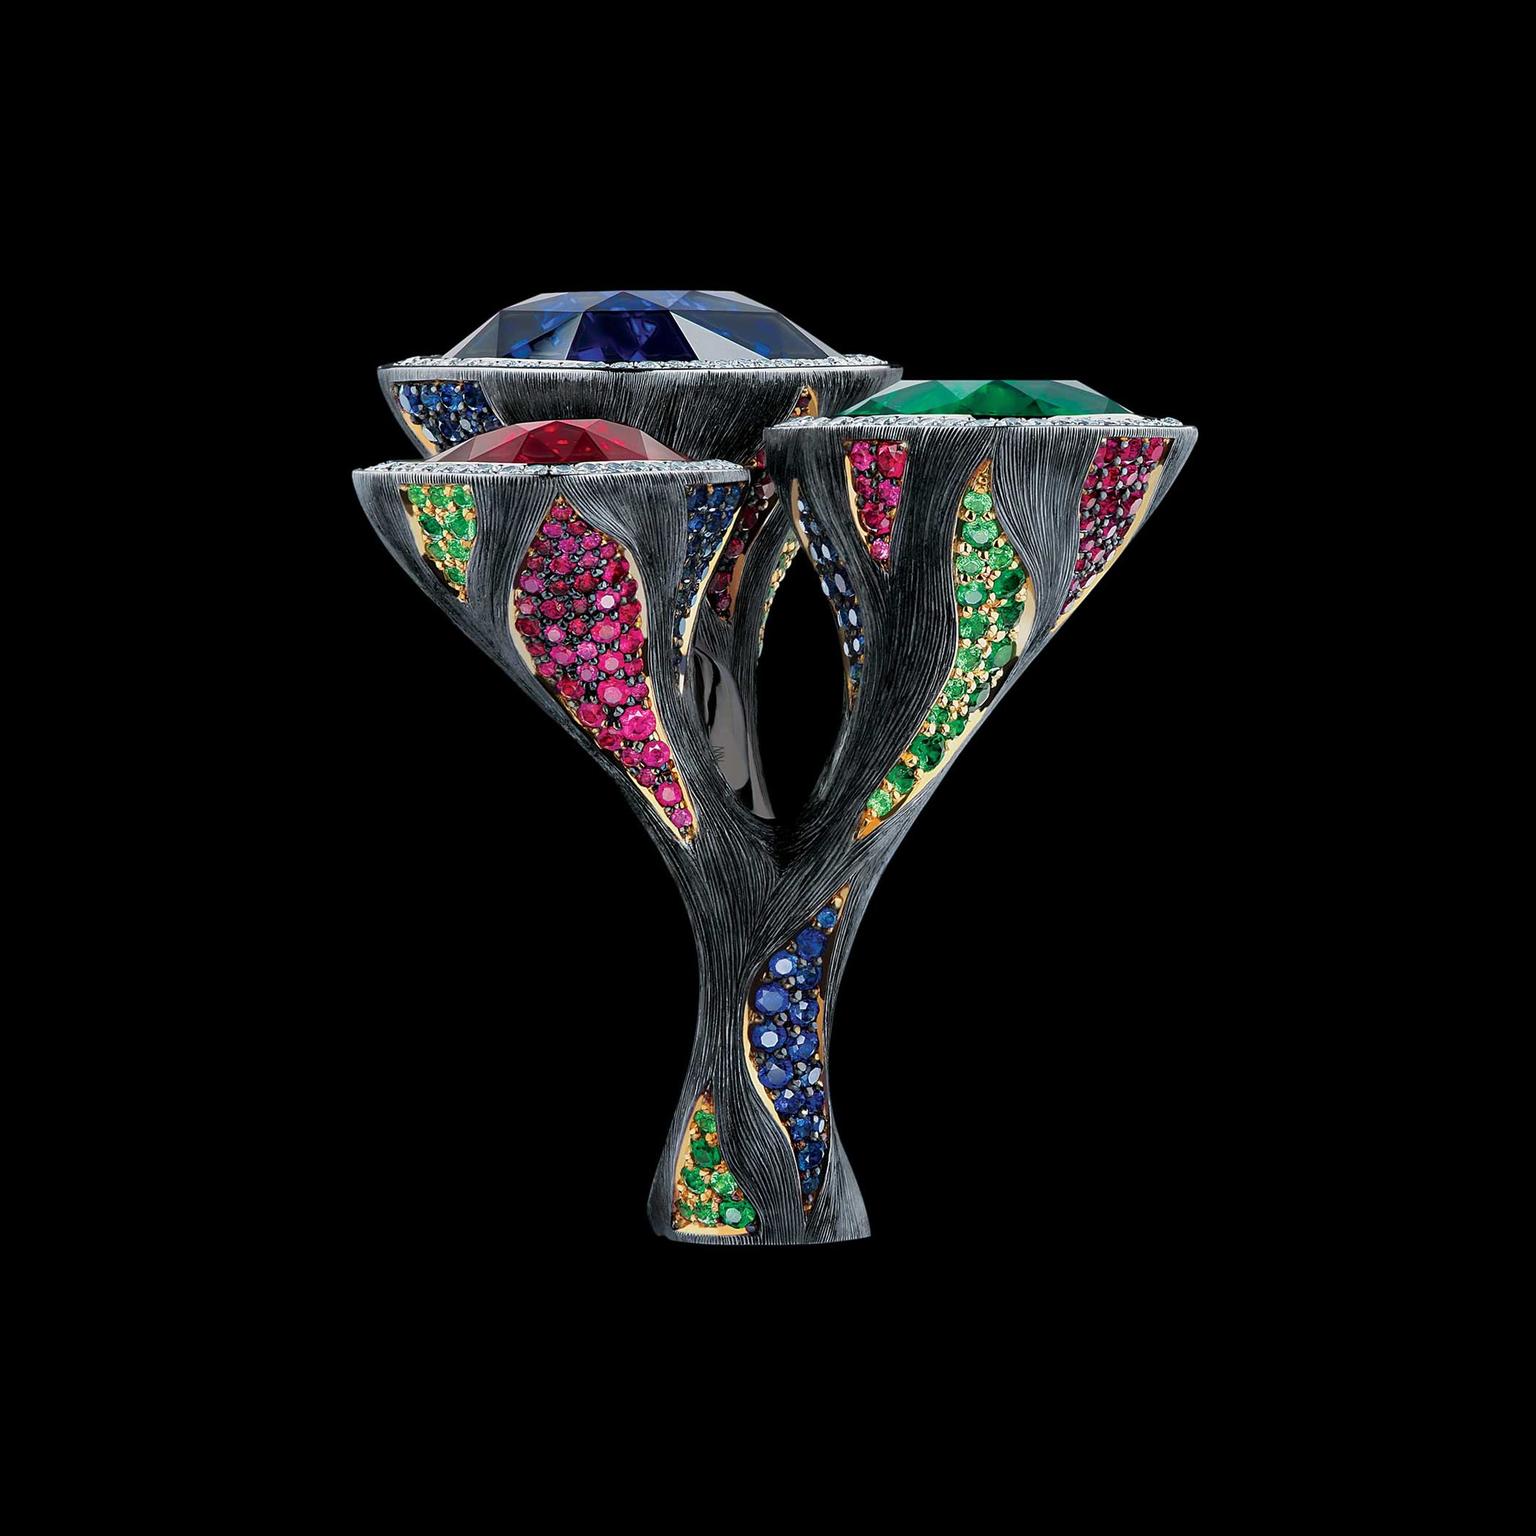 Maxim V Art Stones ring with emerald, ruby and sapphire